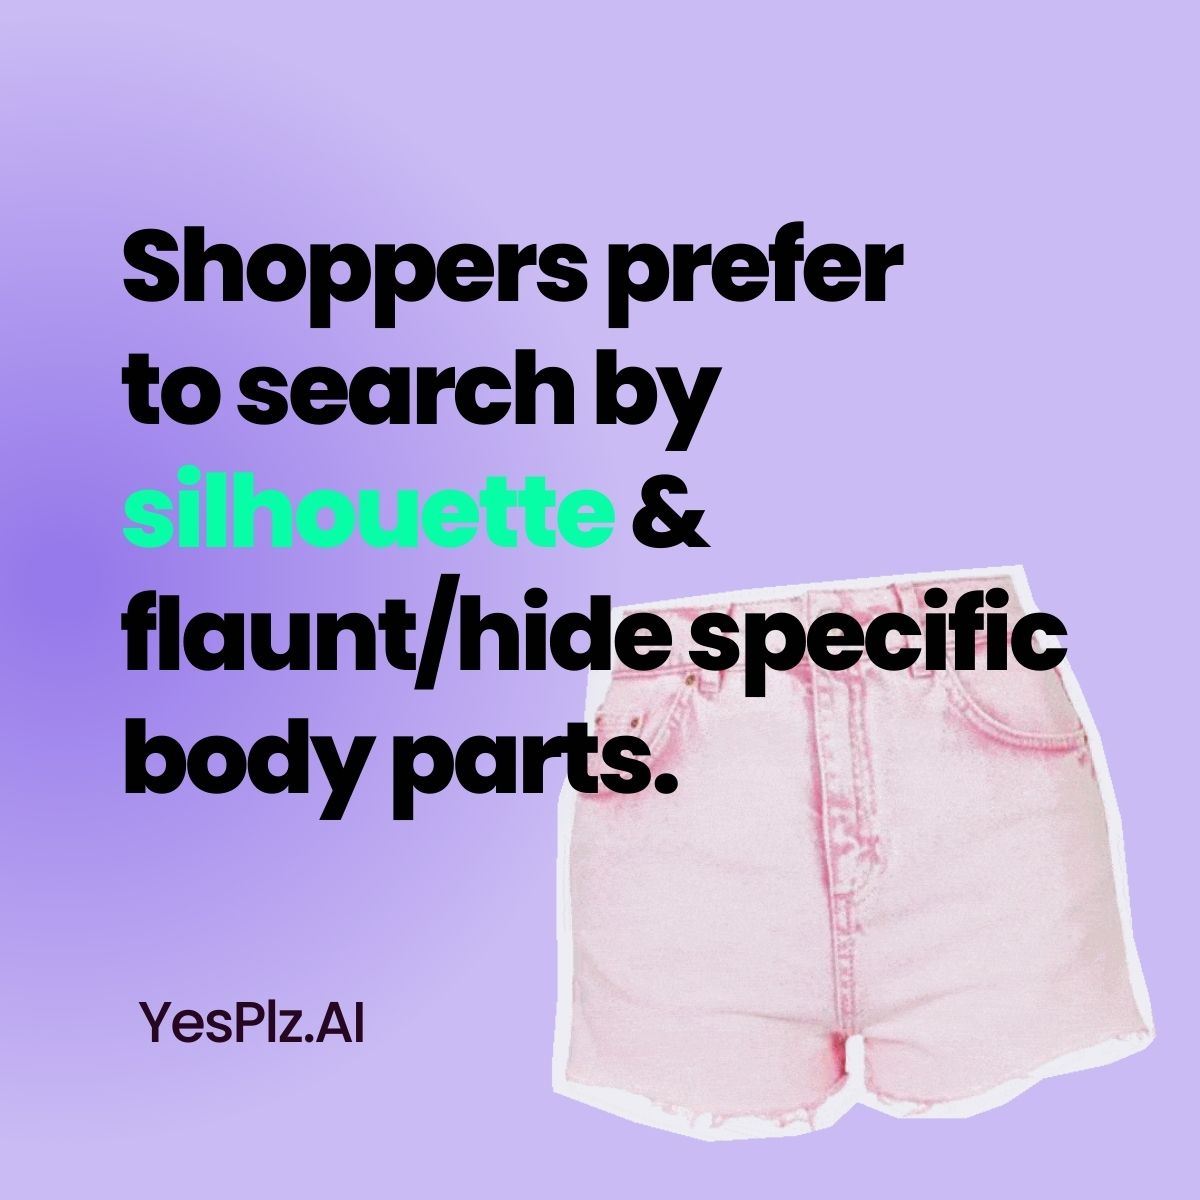 An image of pink shorts with text stating shopper preferences